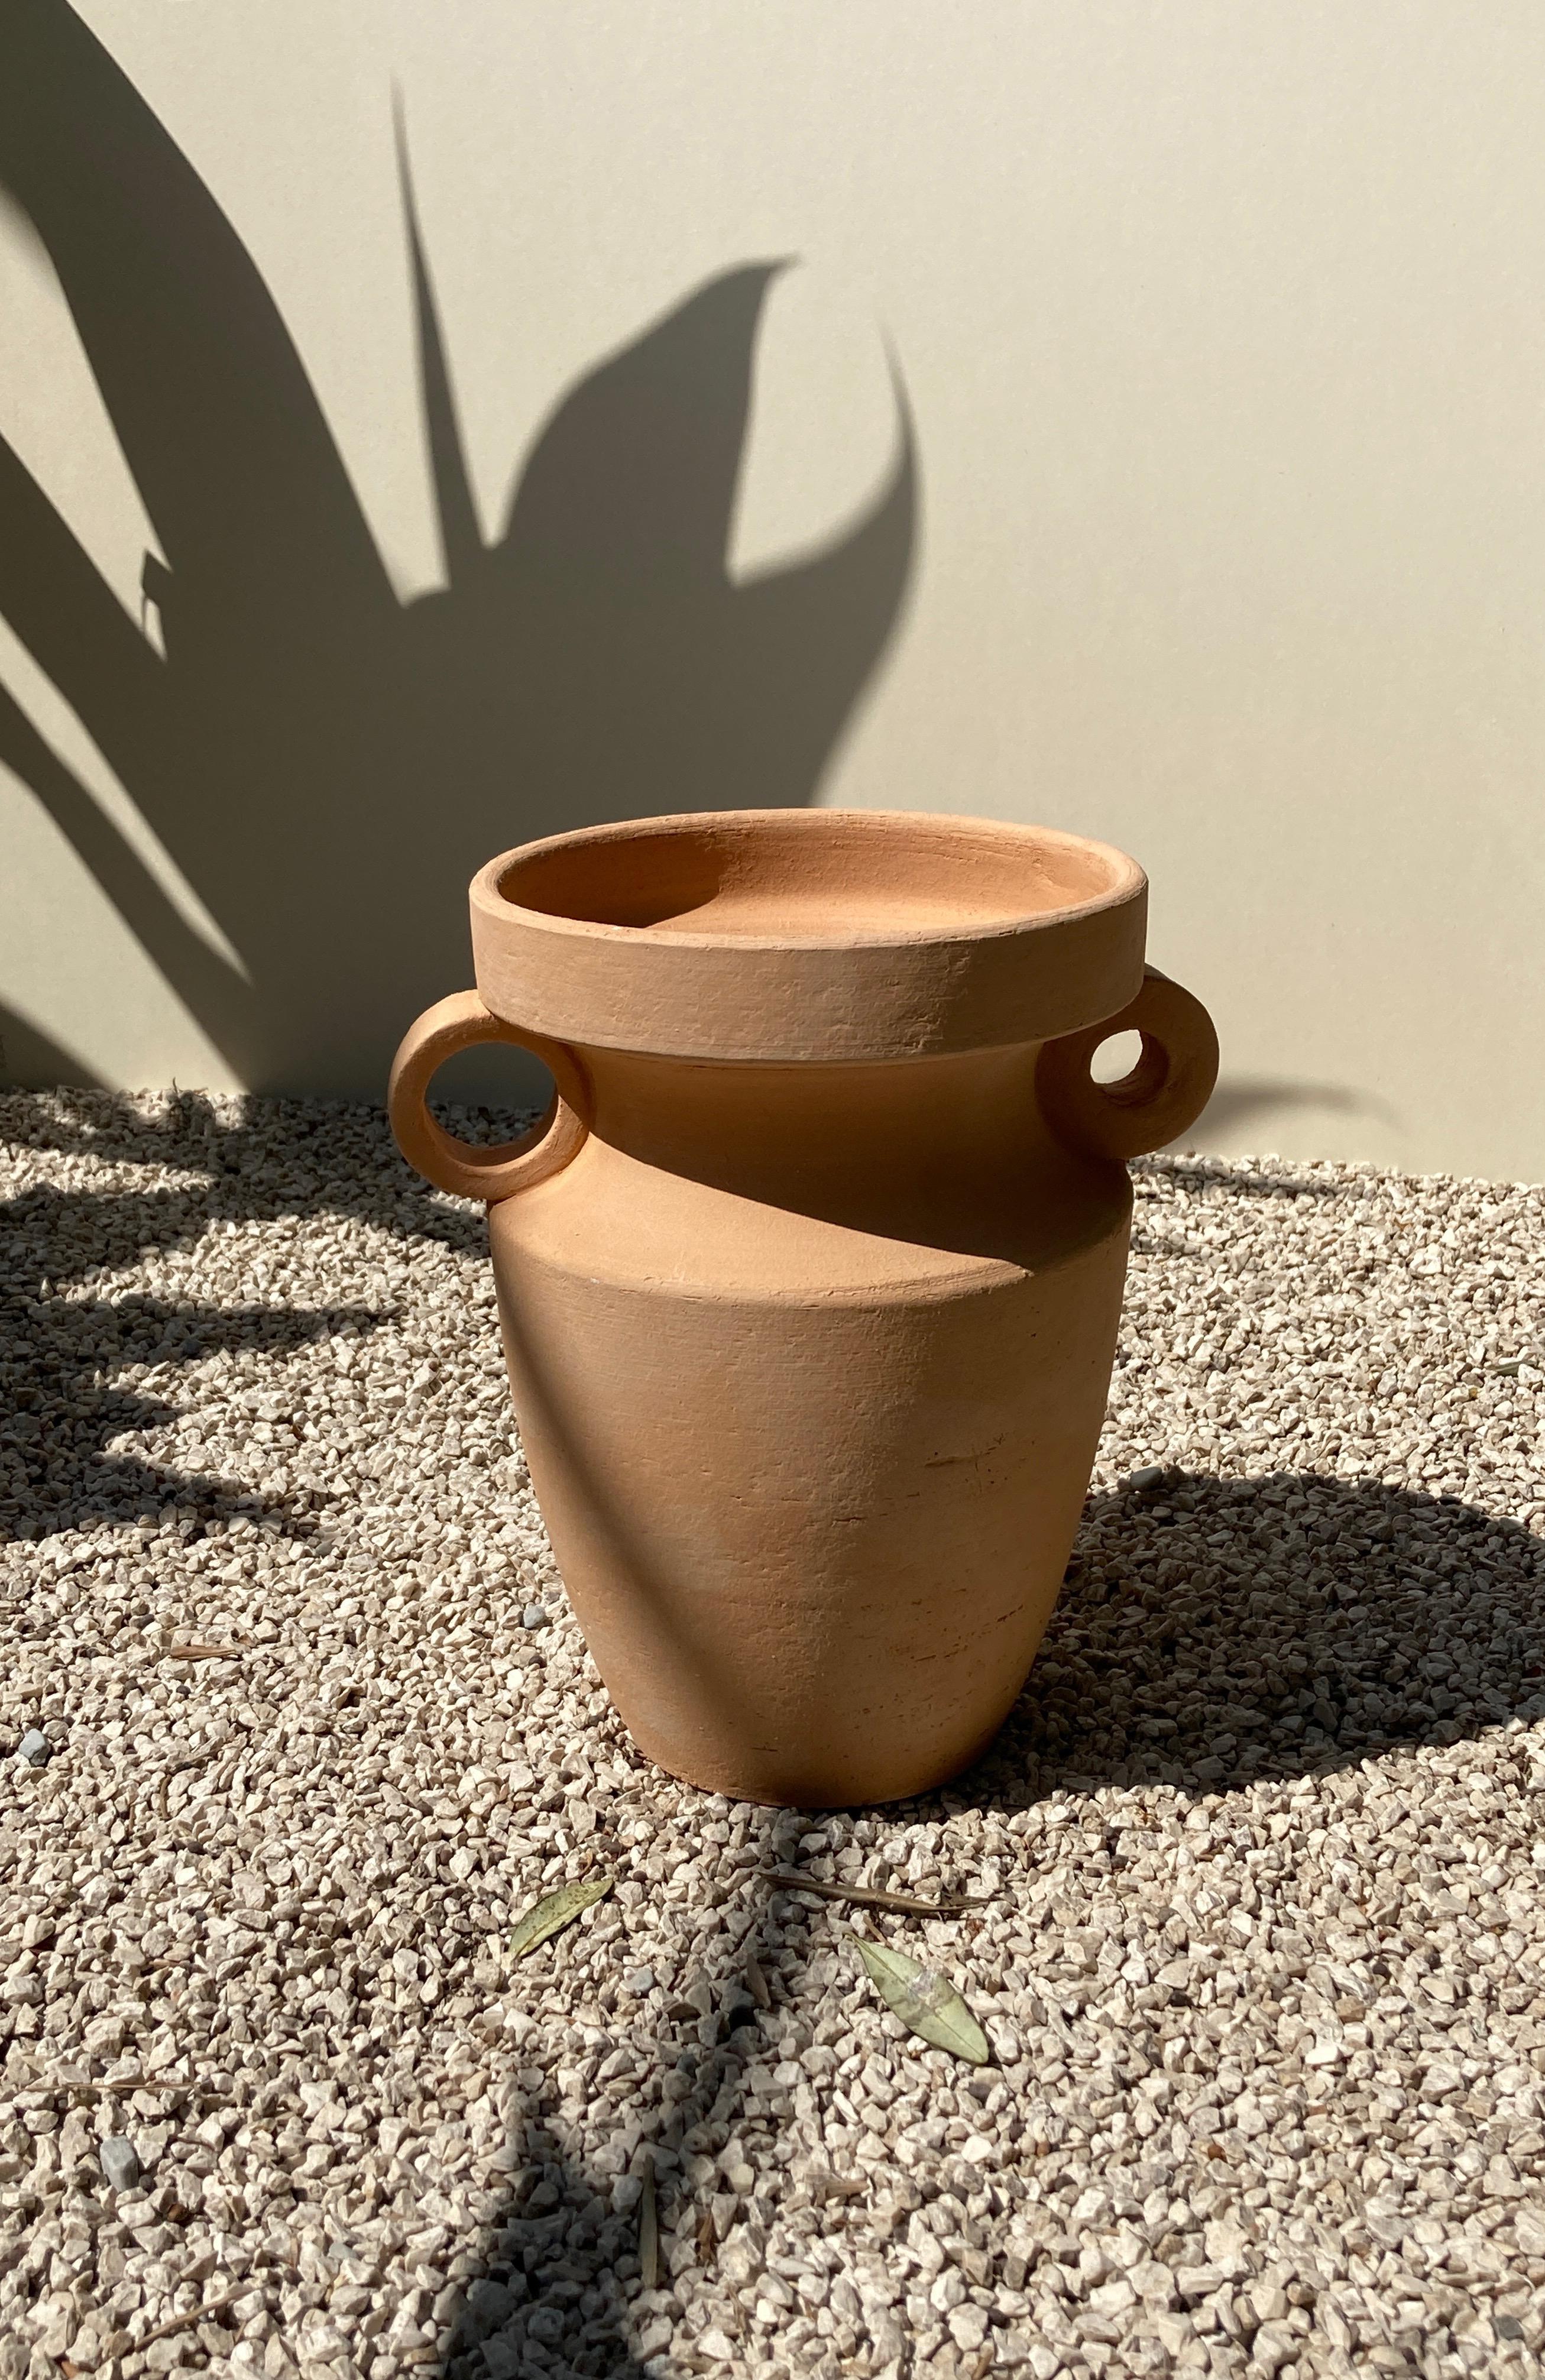 Terracotta Les Inseparables Whole flower vase by Lea Ginac
Limited Edition of 2. 
Dimensions: Diameter 24 x H 34 cm 
Materials: Chamotte earth in white or terracotta
Technique: Hand-modeling.
Available in two colors, terra cotta, and